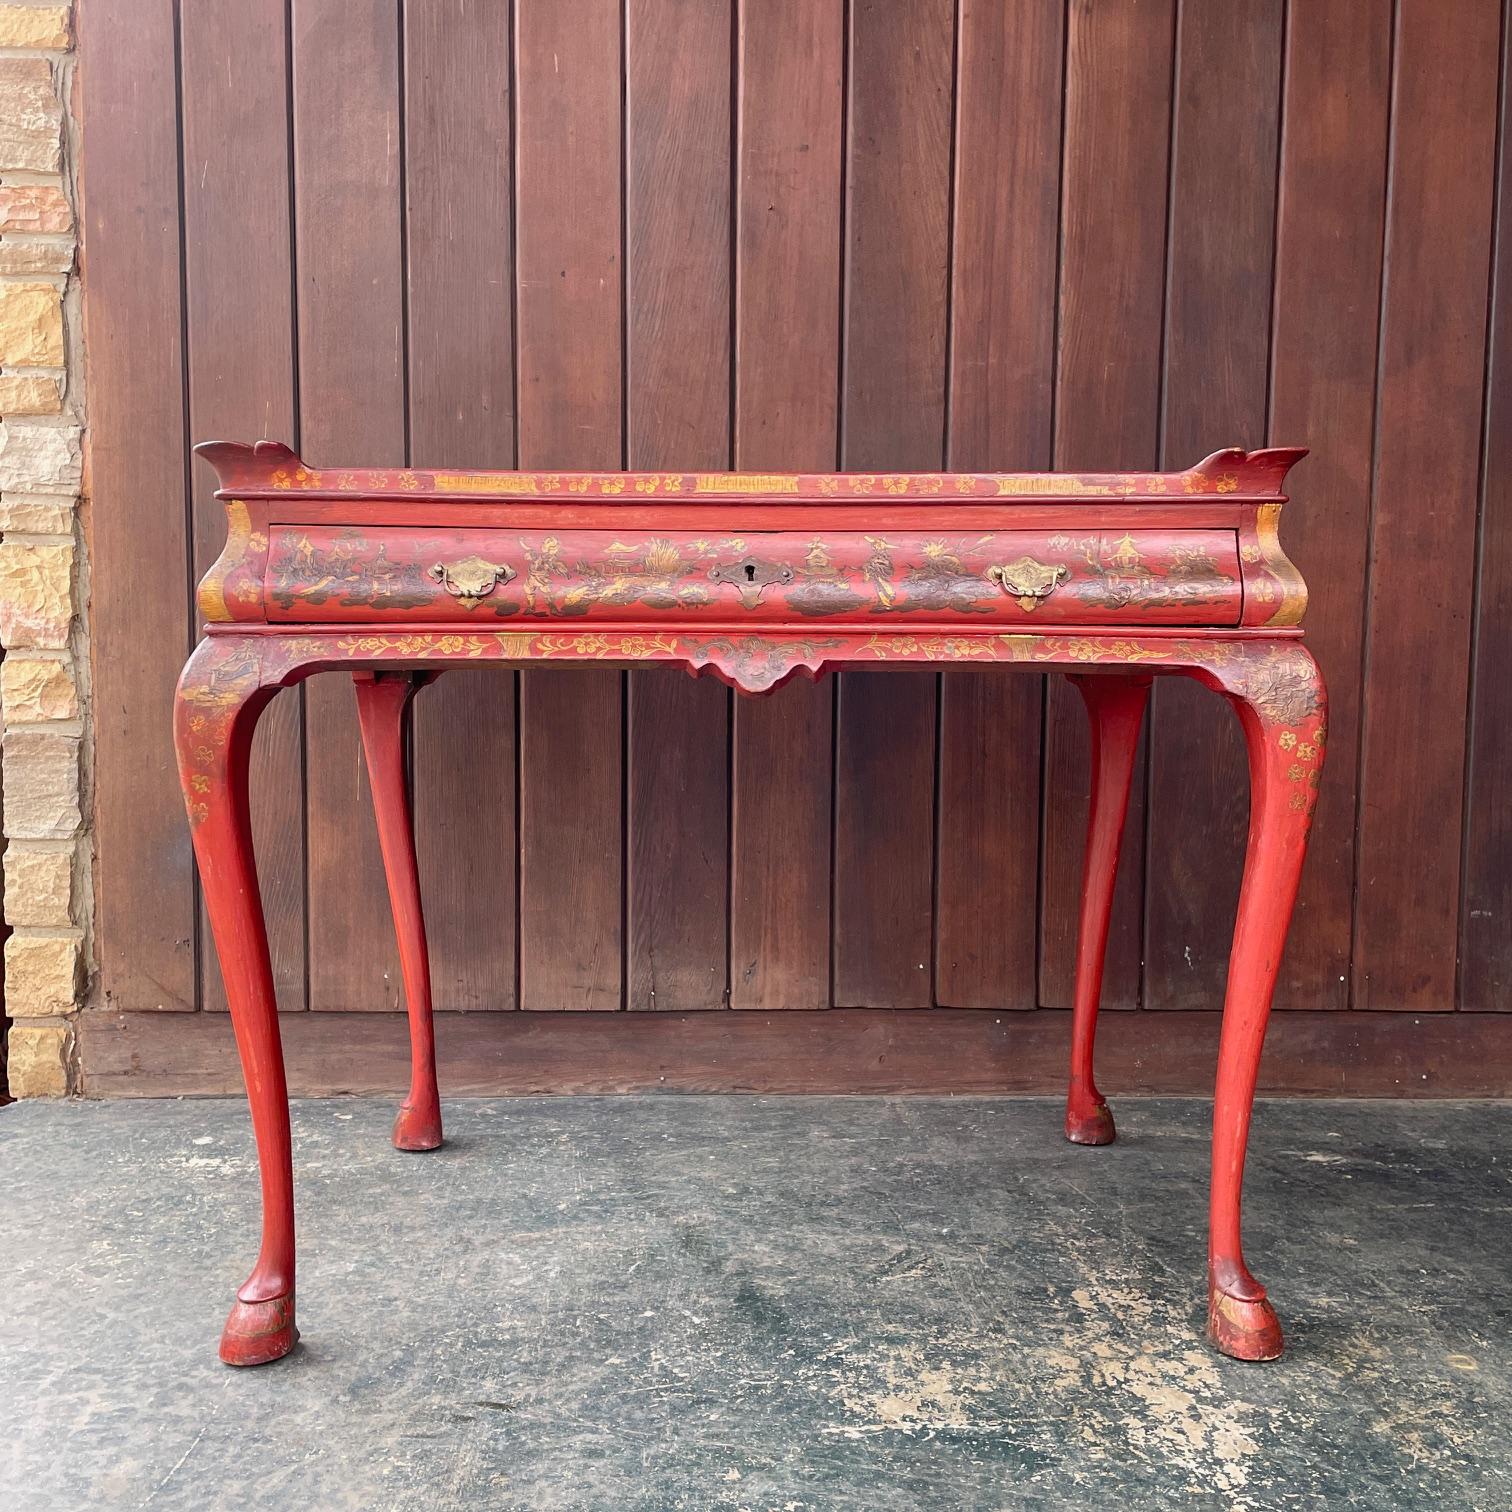 19th Century English Queen Anne Red Lacquered Chinoiserie Desk, No key. Draw is working smoothly. Produced in England or North America, but the exact origin is unknown to us.
W 35.5 x D 23 x H 29.25 in
H 22 1/4 in (Floor to Table Skirt)

Pick up in